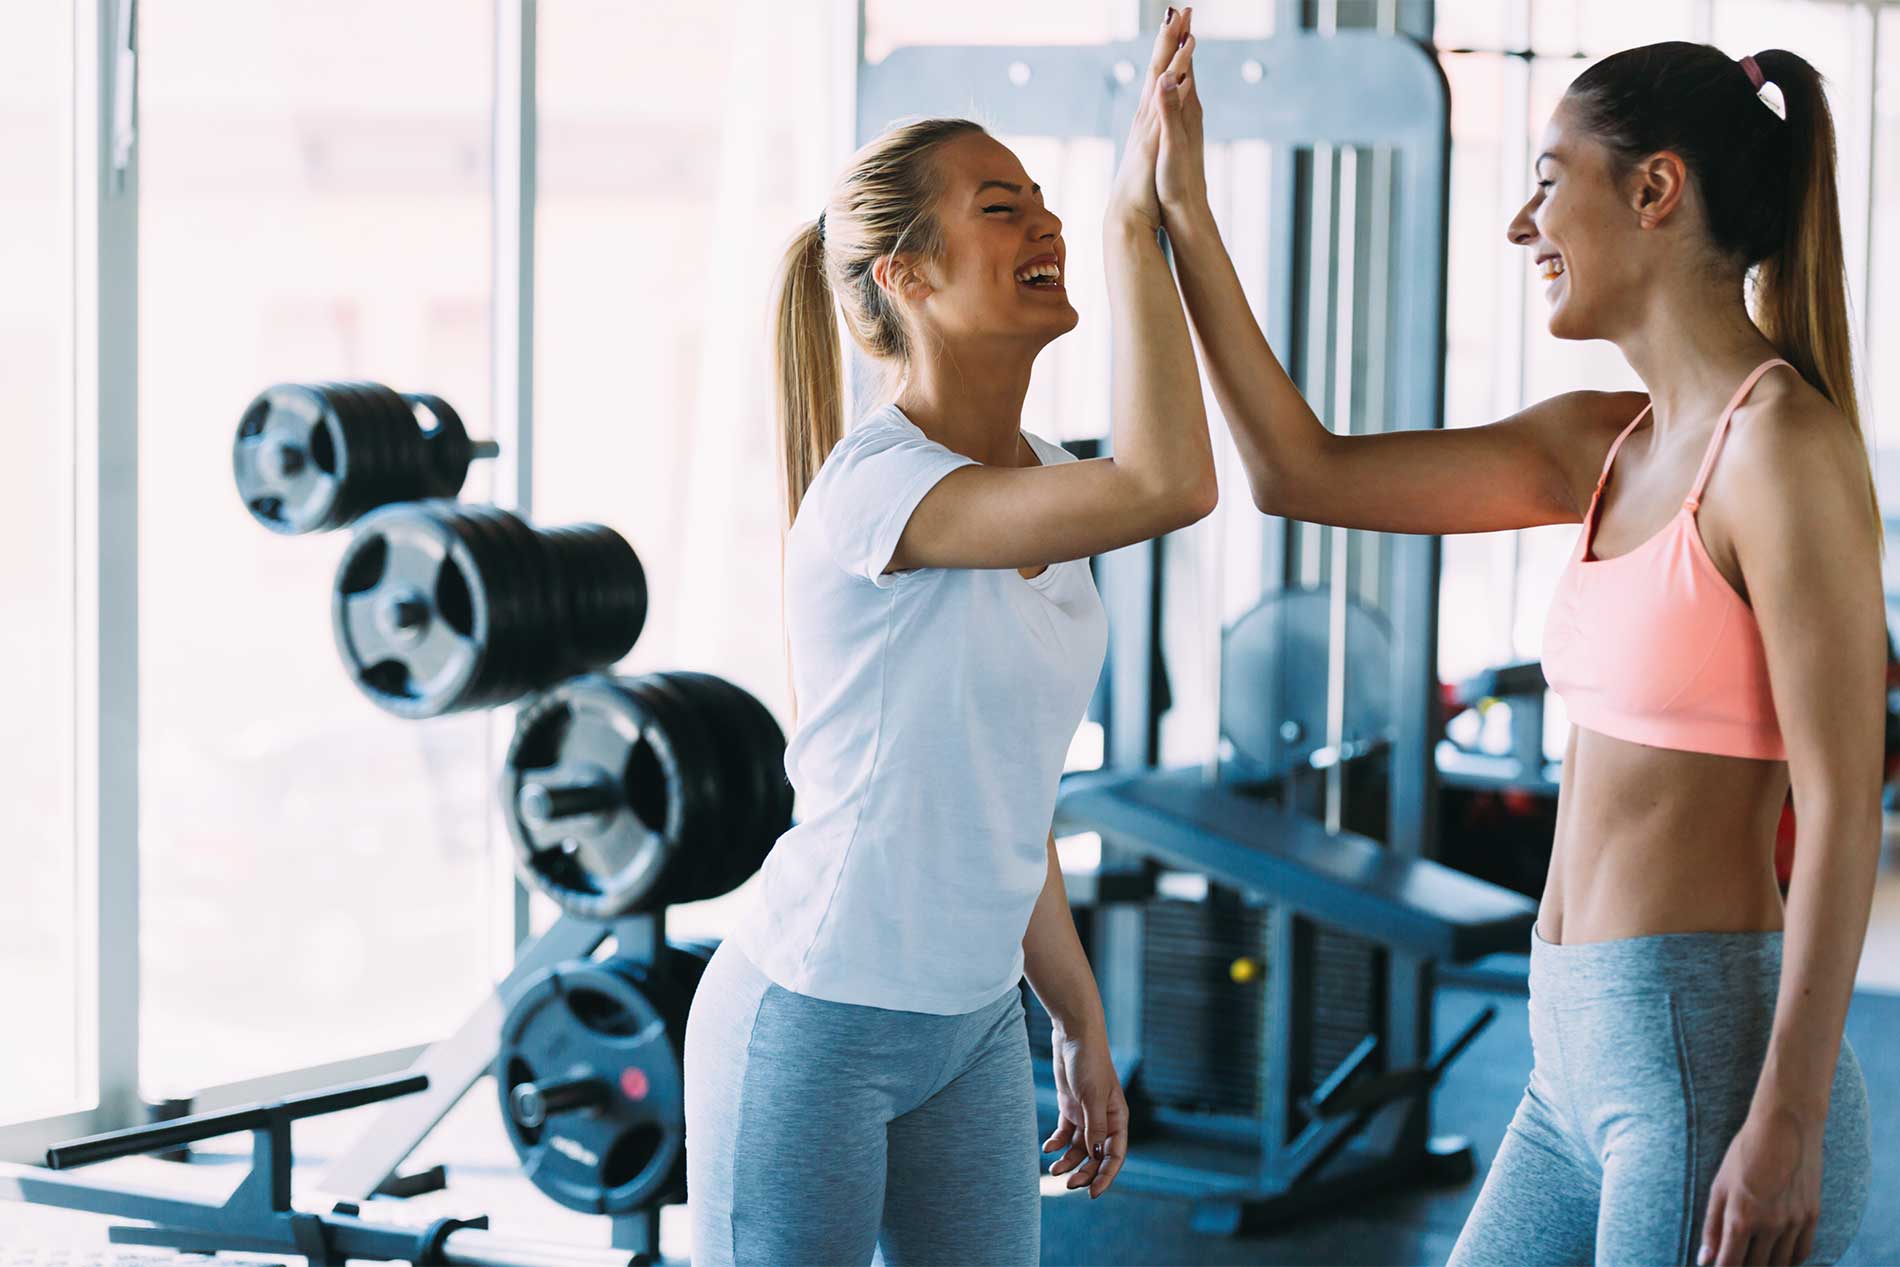 Two women high fiving in the fitness center